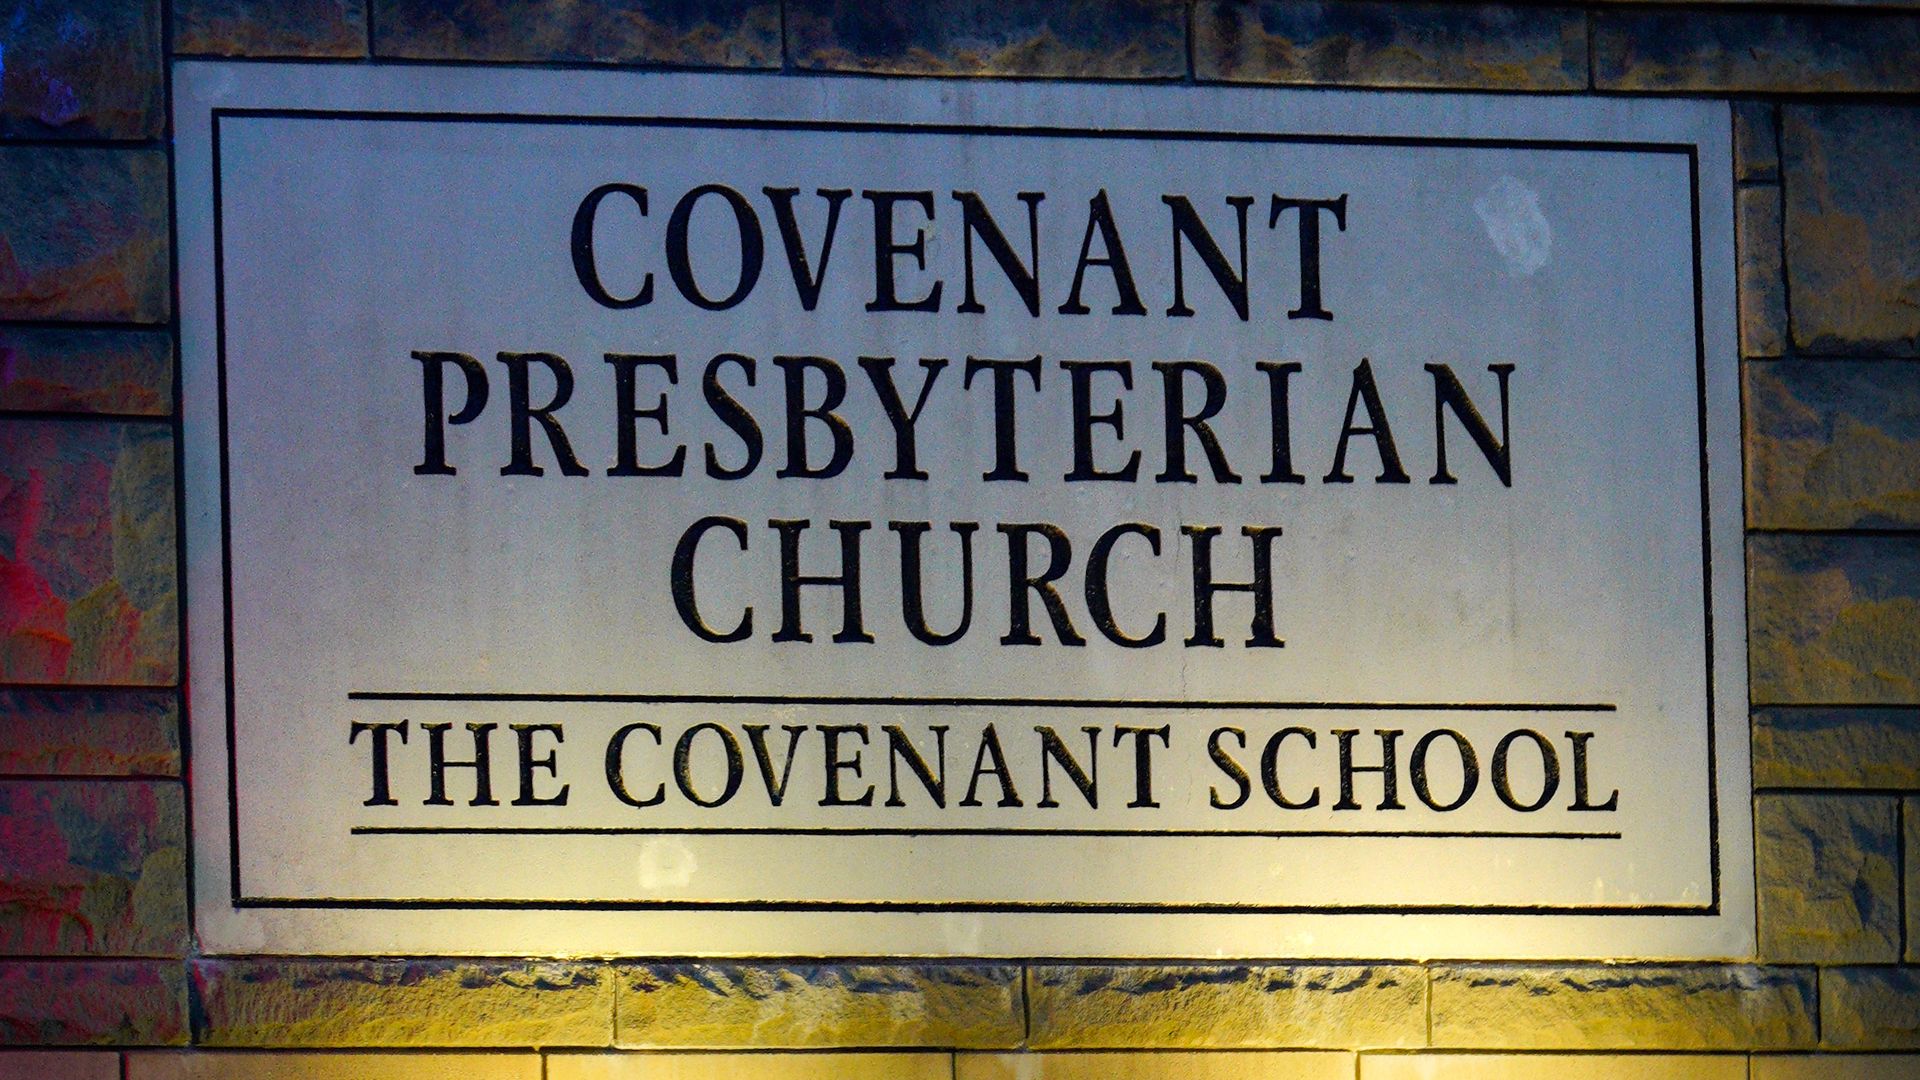 Entrance of The Covenant School